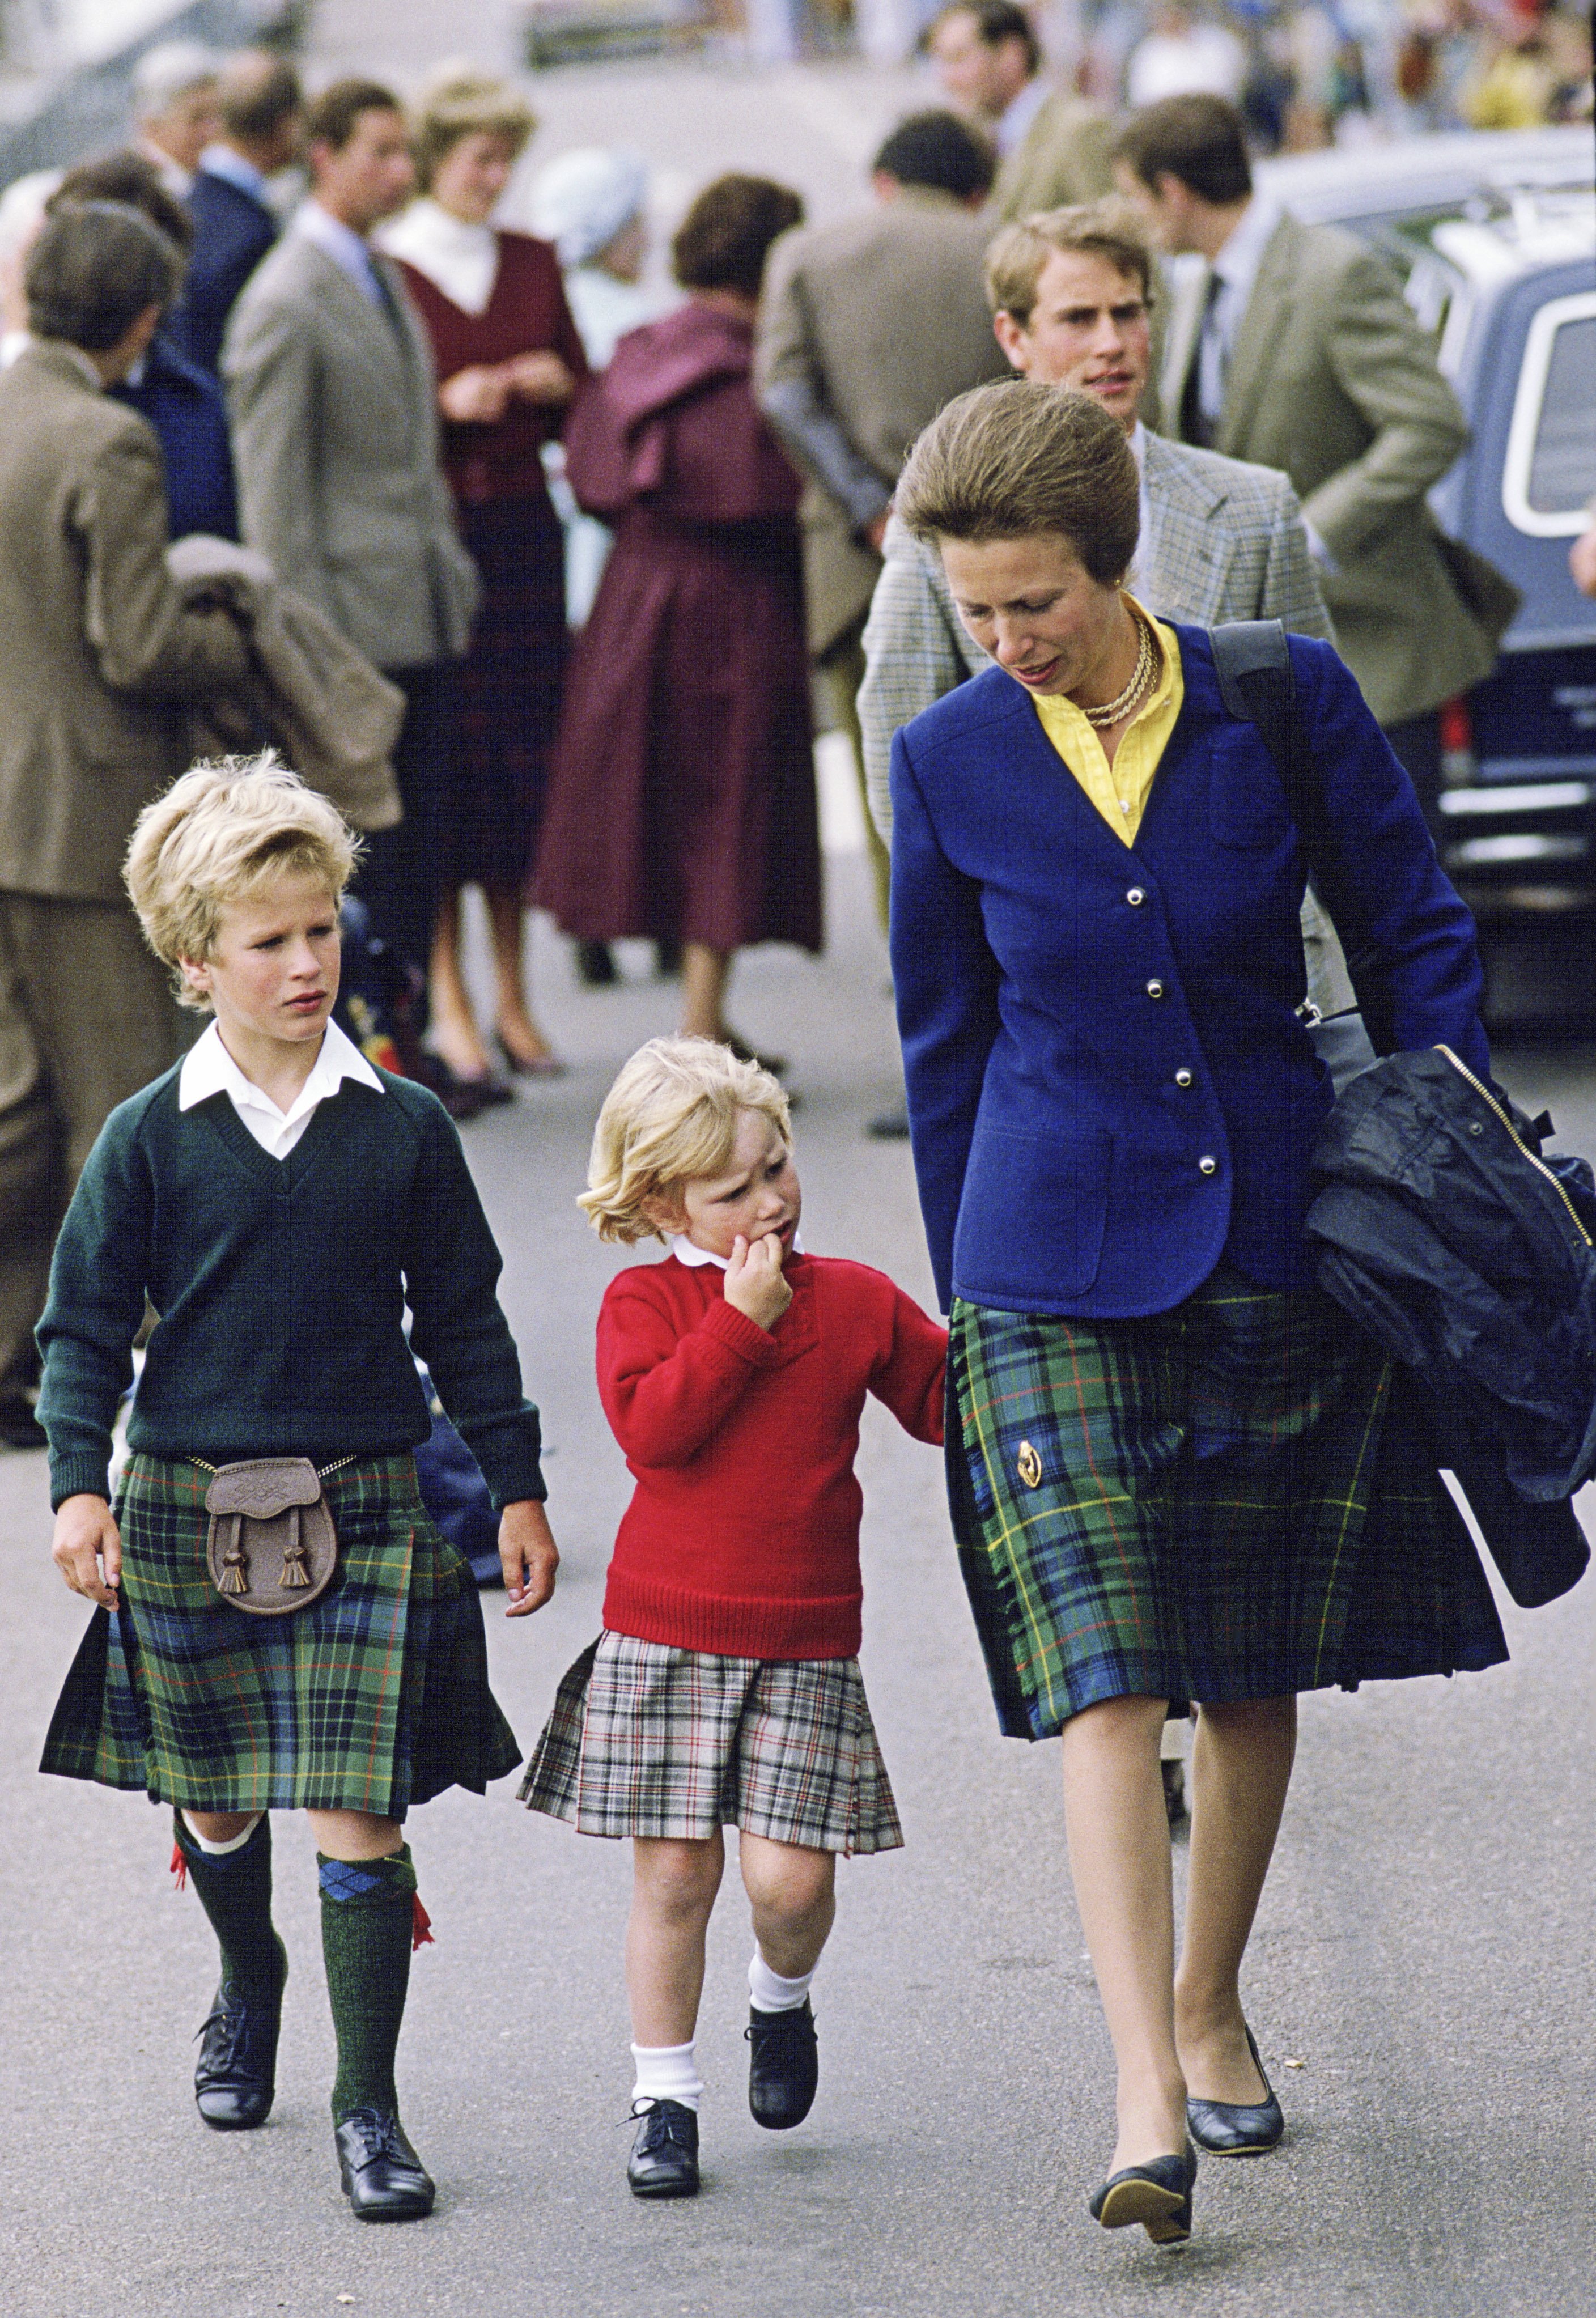 Princess Anne with her children, Peter and Zara, in Scotland in 1985 | Source: Getty Images